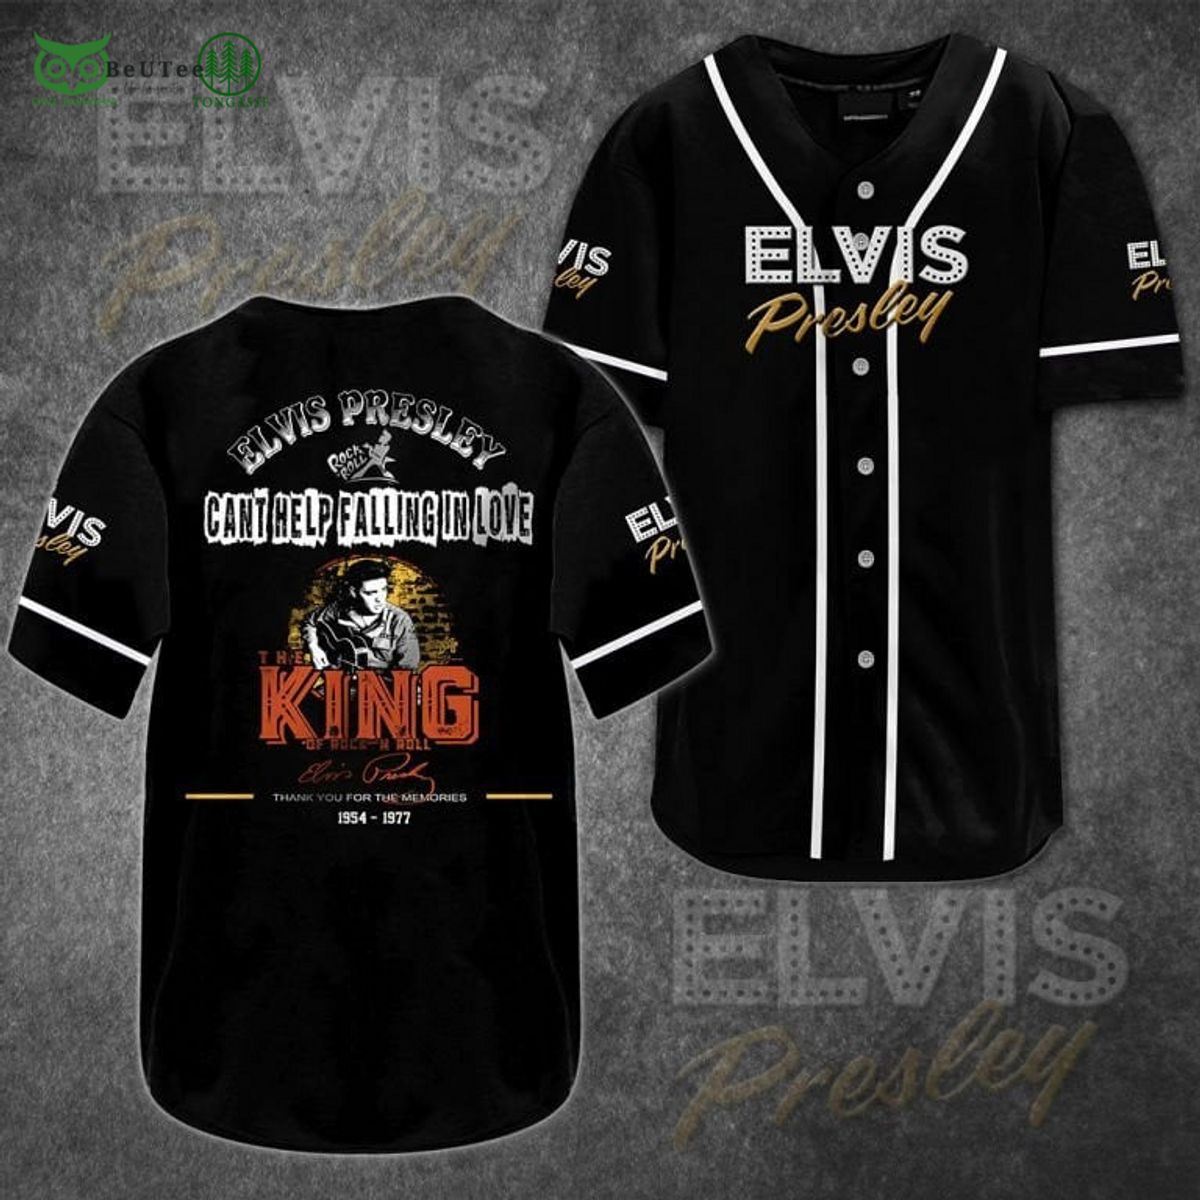 cant help falling in love king elvis presley jersey shirt 1 G6xk0